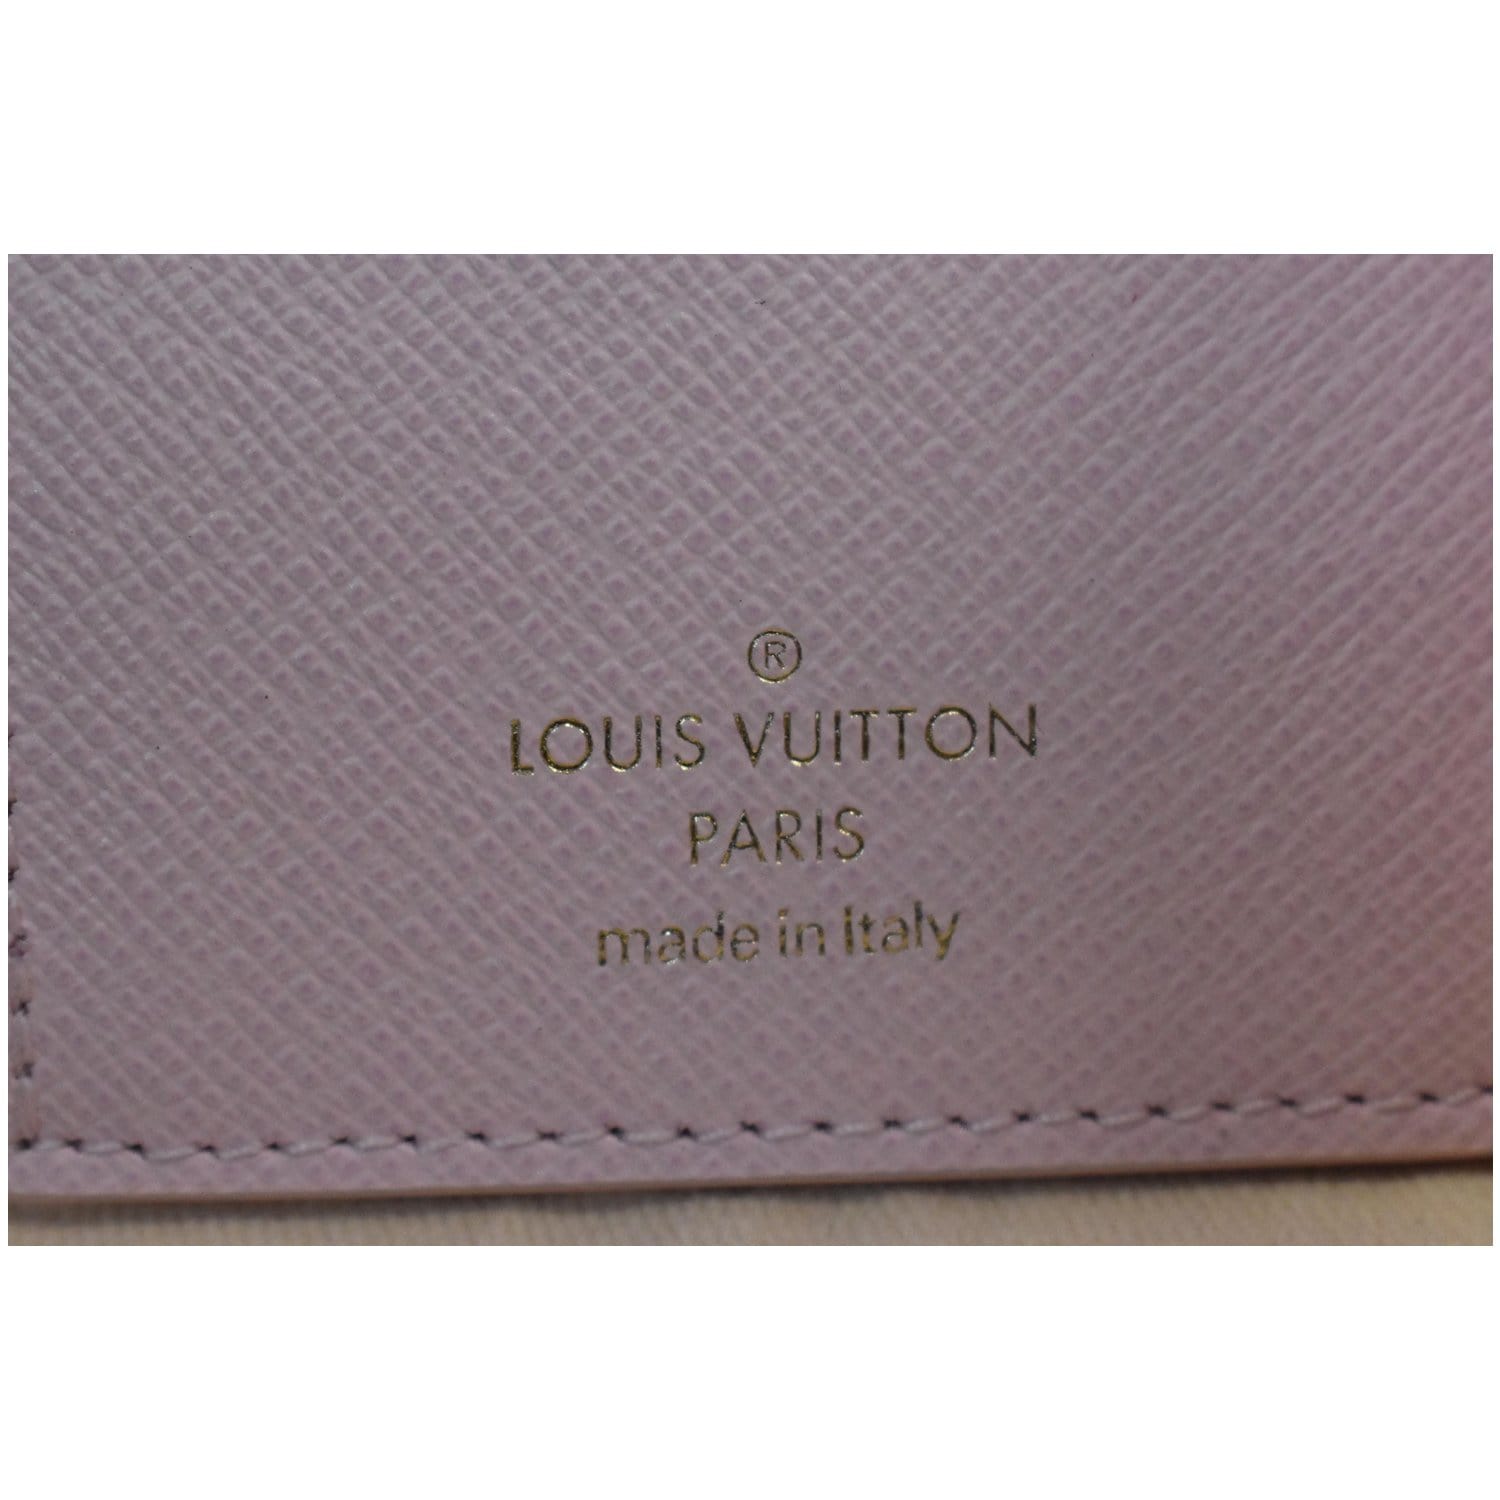 Bought someone this beautiful wallet and hotstamped her initials in gold on  the pink inside! : r/Louisvuitton